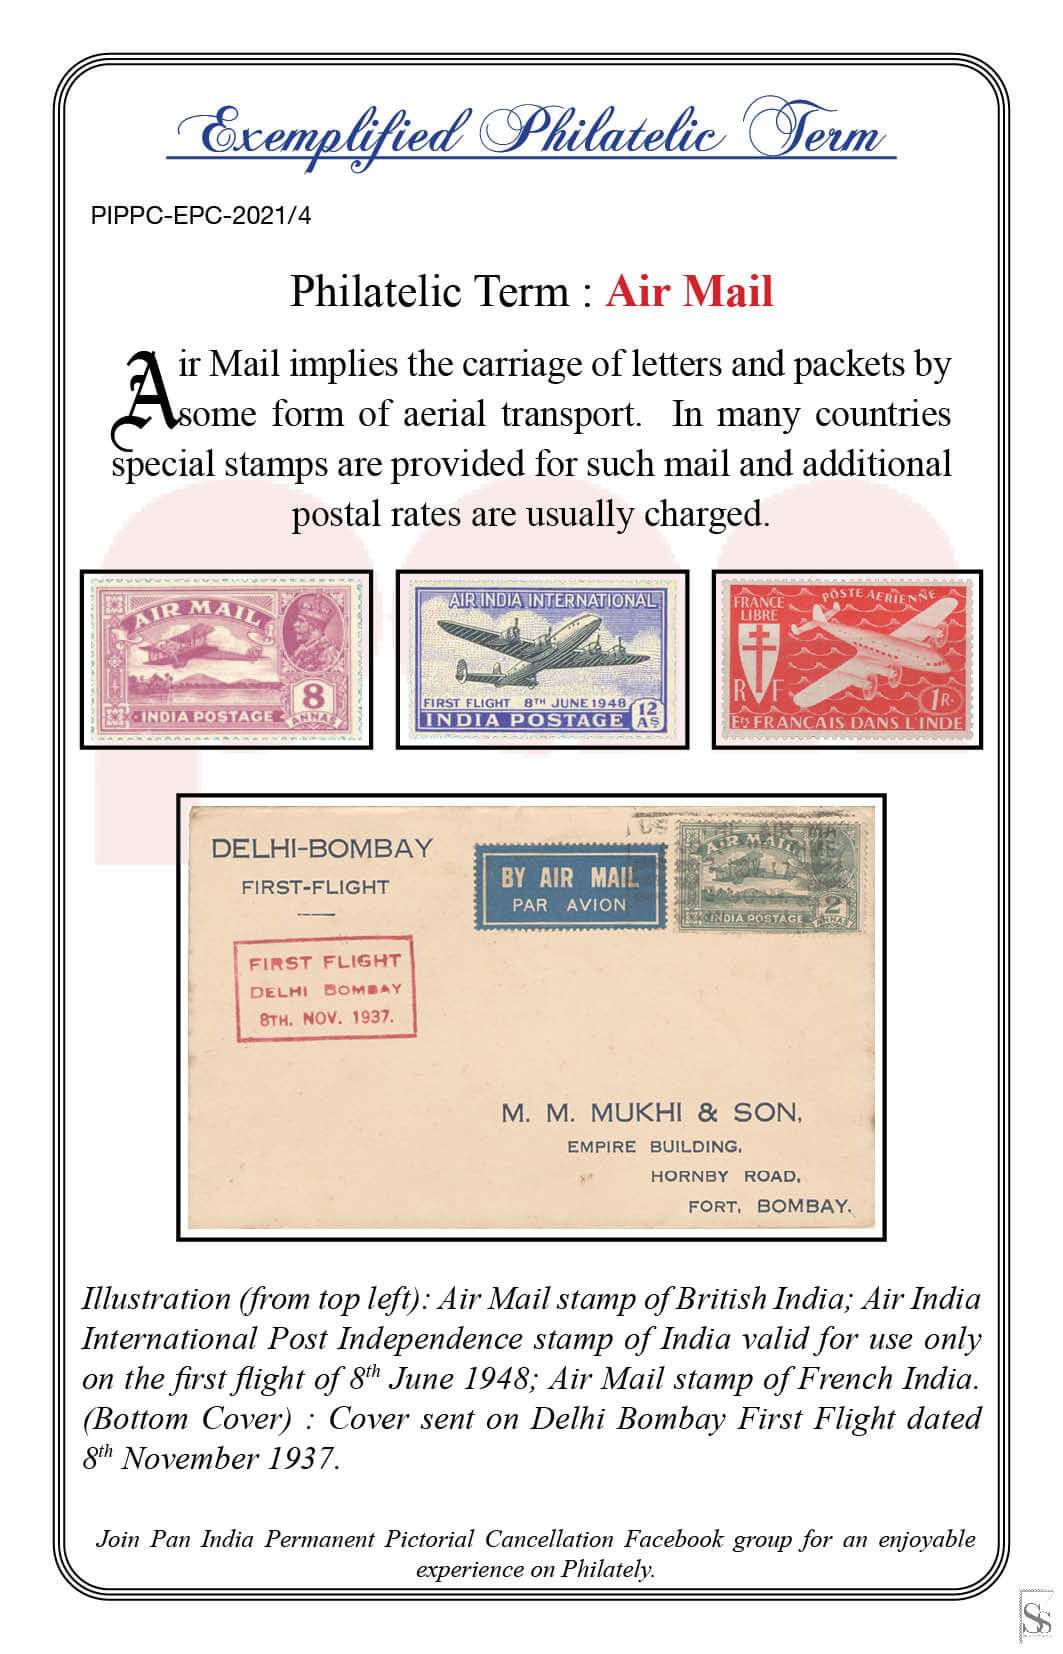 04. Today's Exemplified Philatelic Term Air Mail